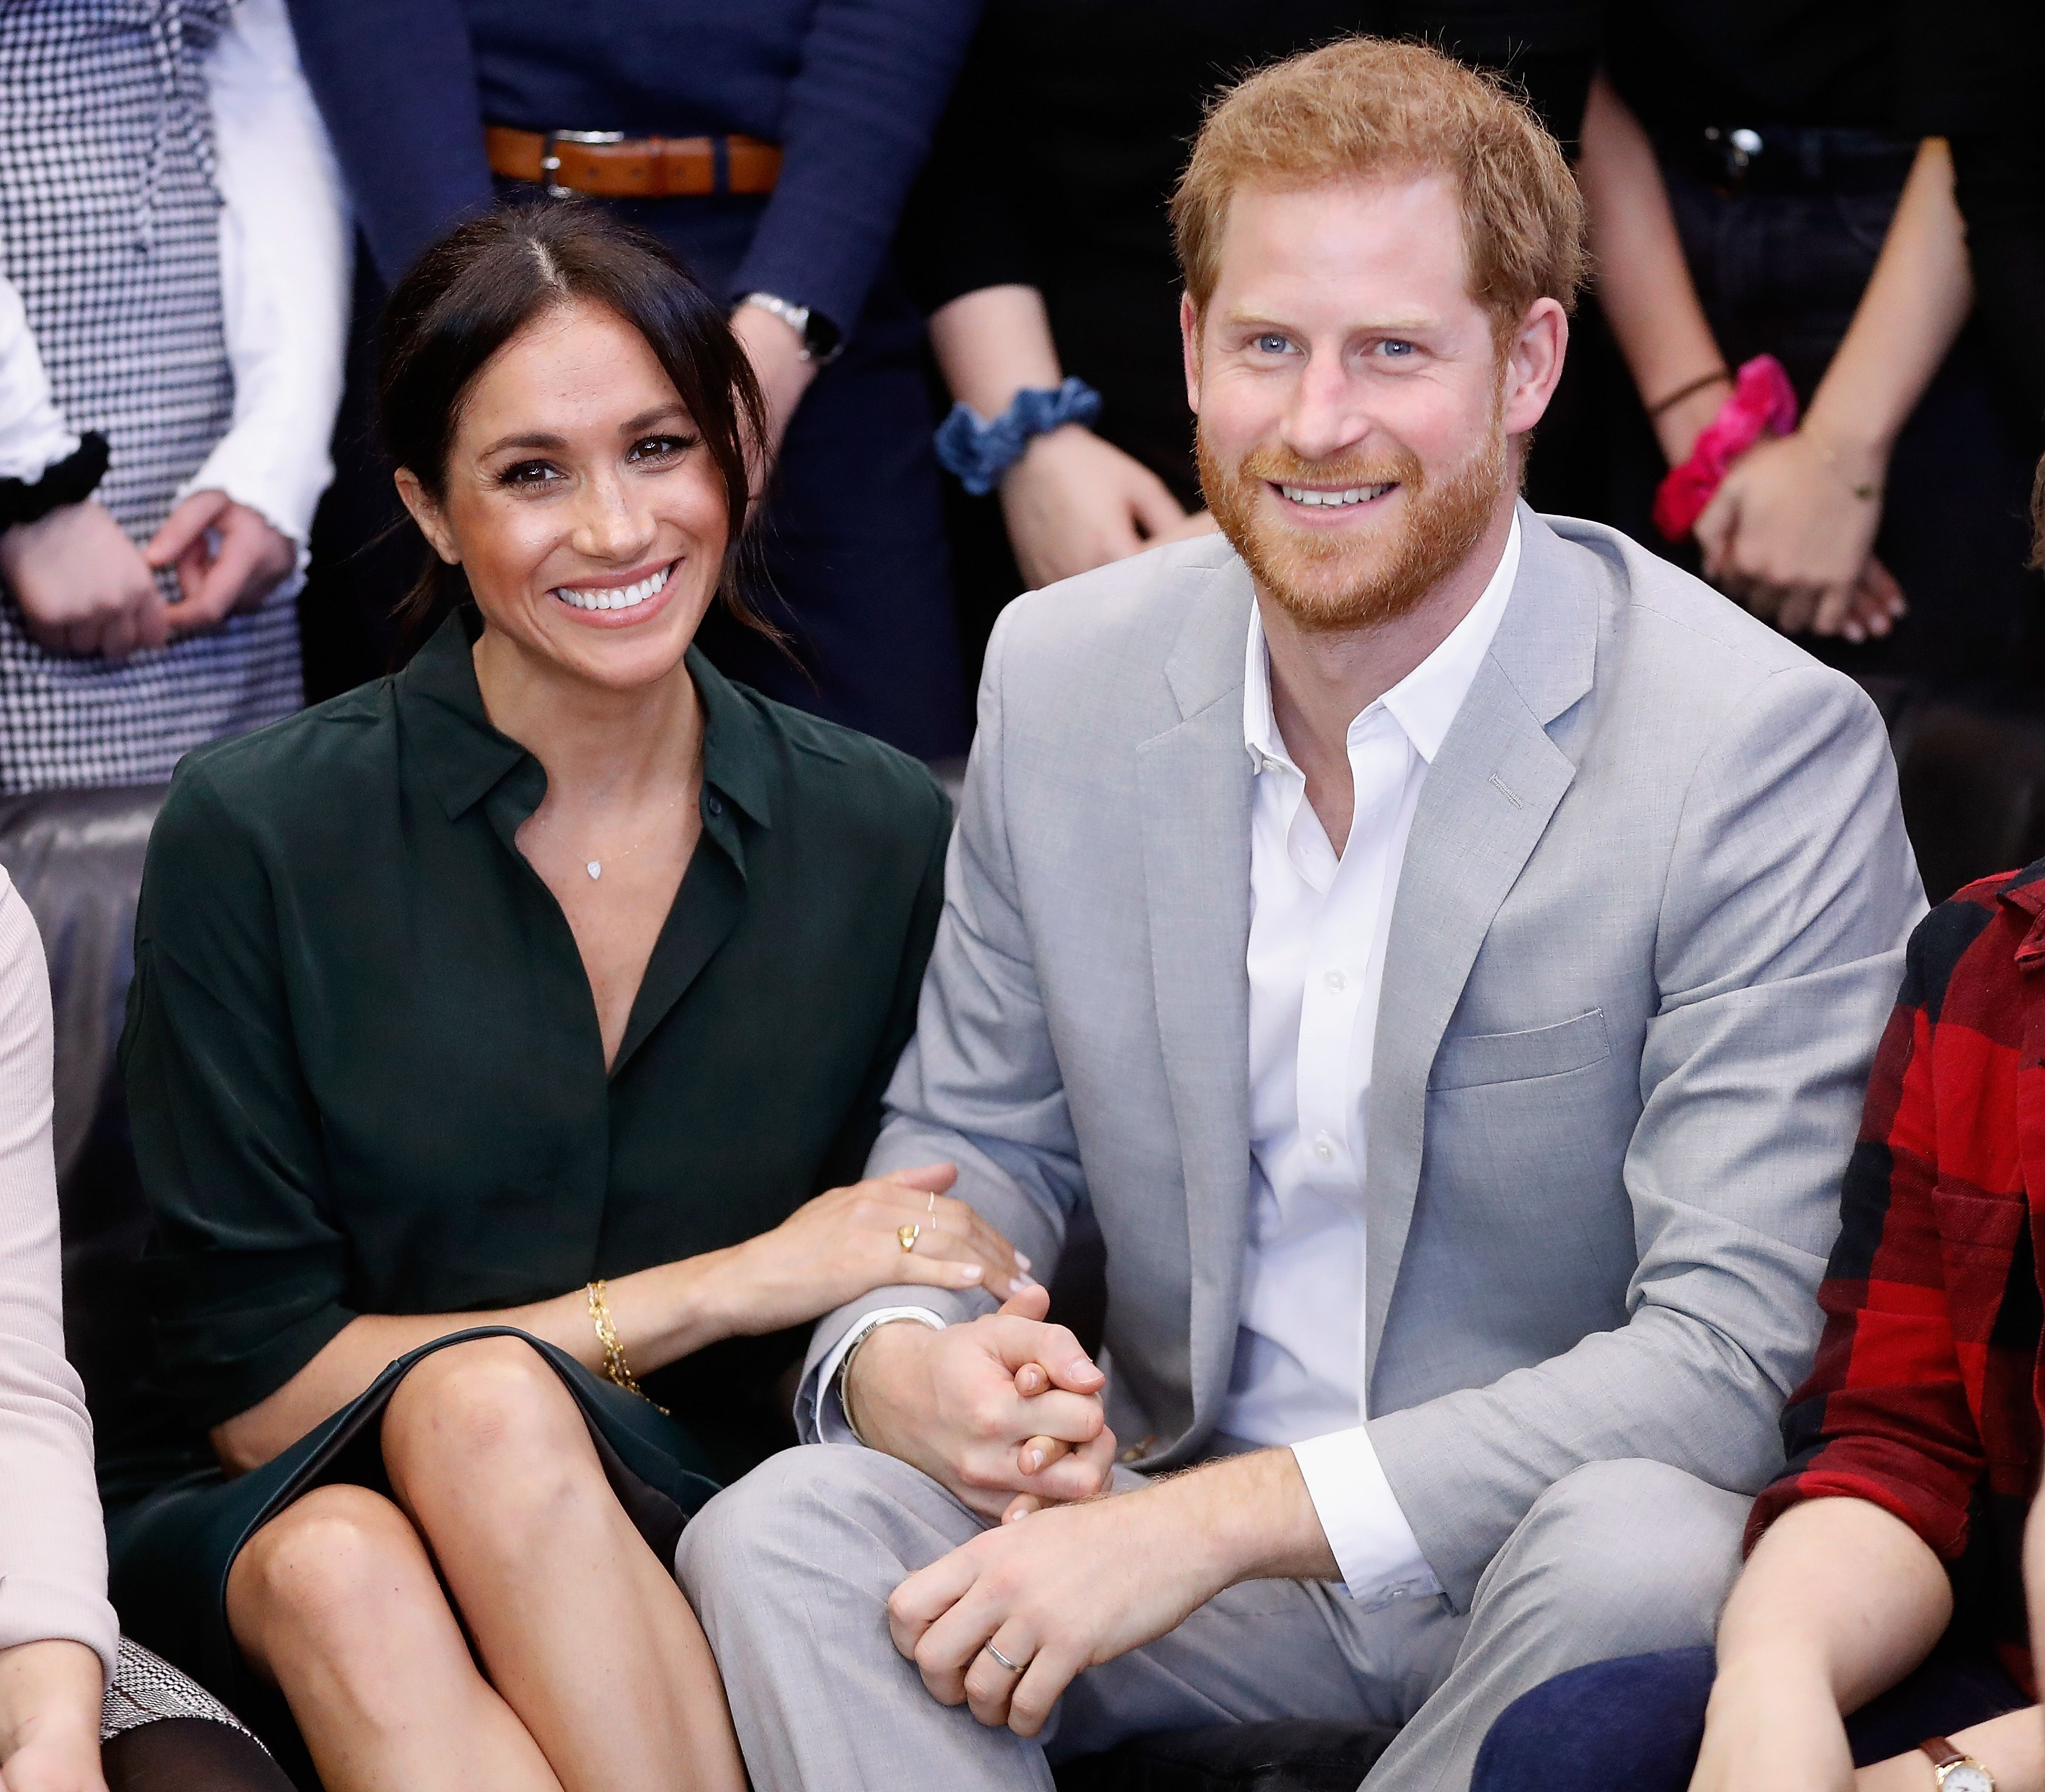 Meghan and Prince Harry during an official visit to the Joff Youth Centre in Peacehaven, Sussex on October 3, 2018 | Photo: Getty Images